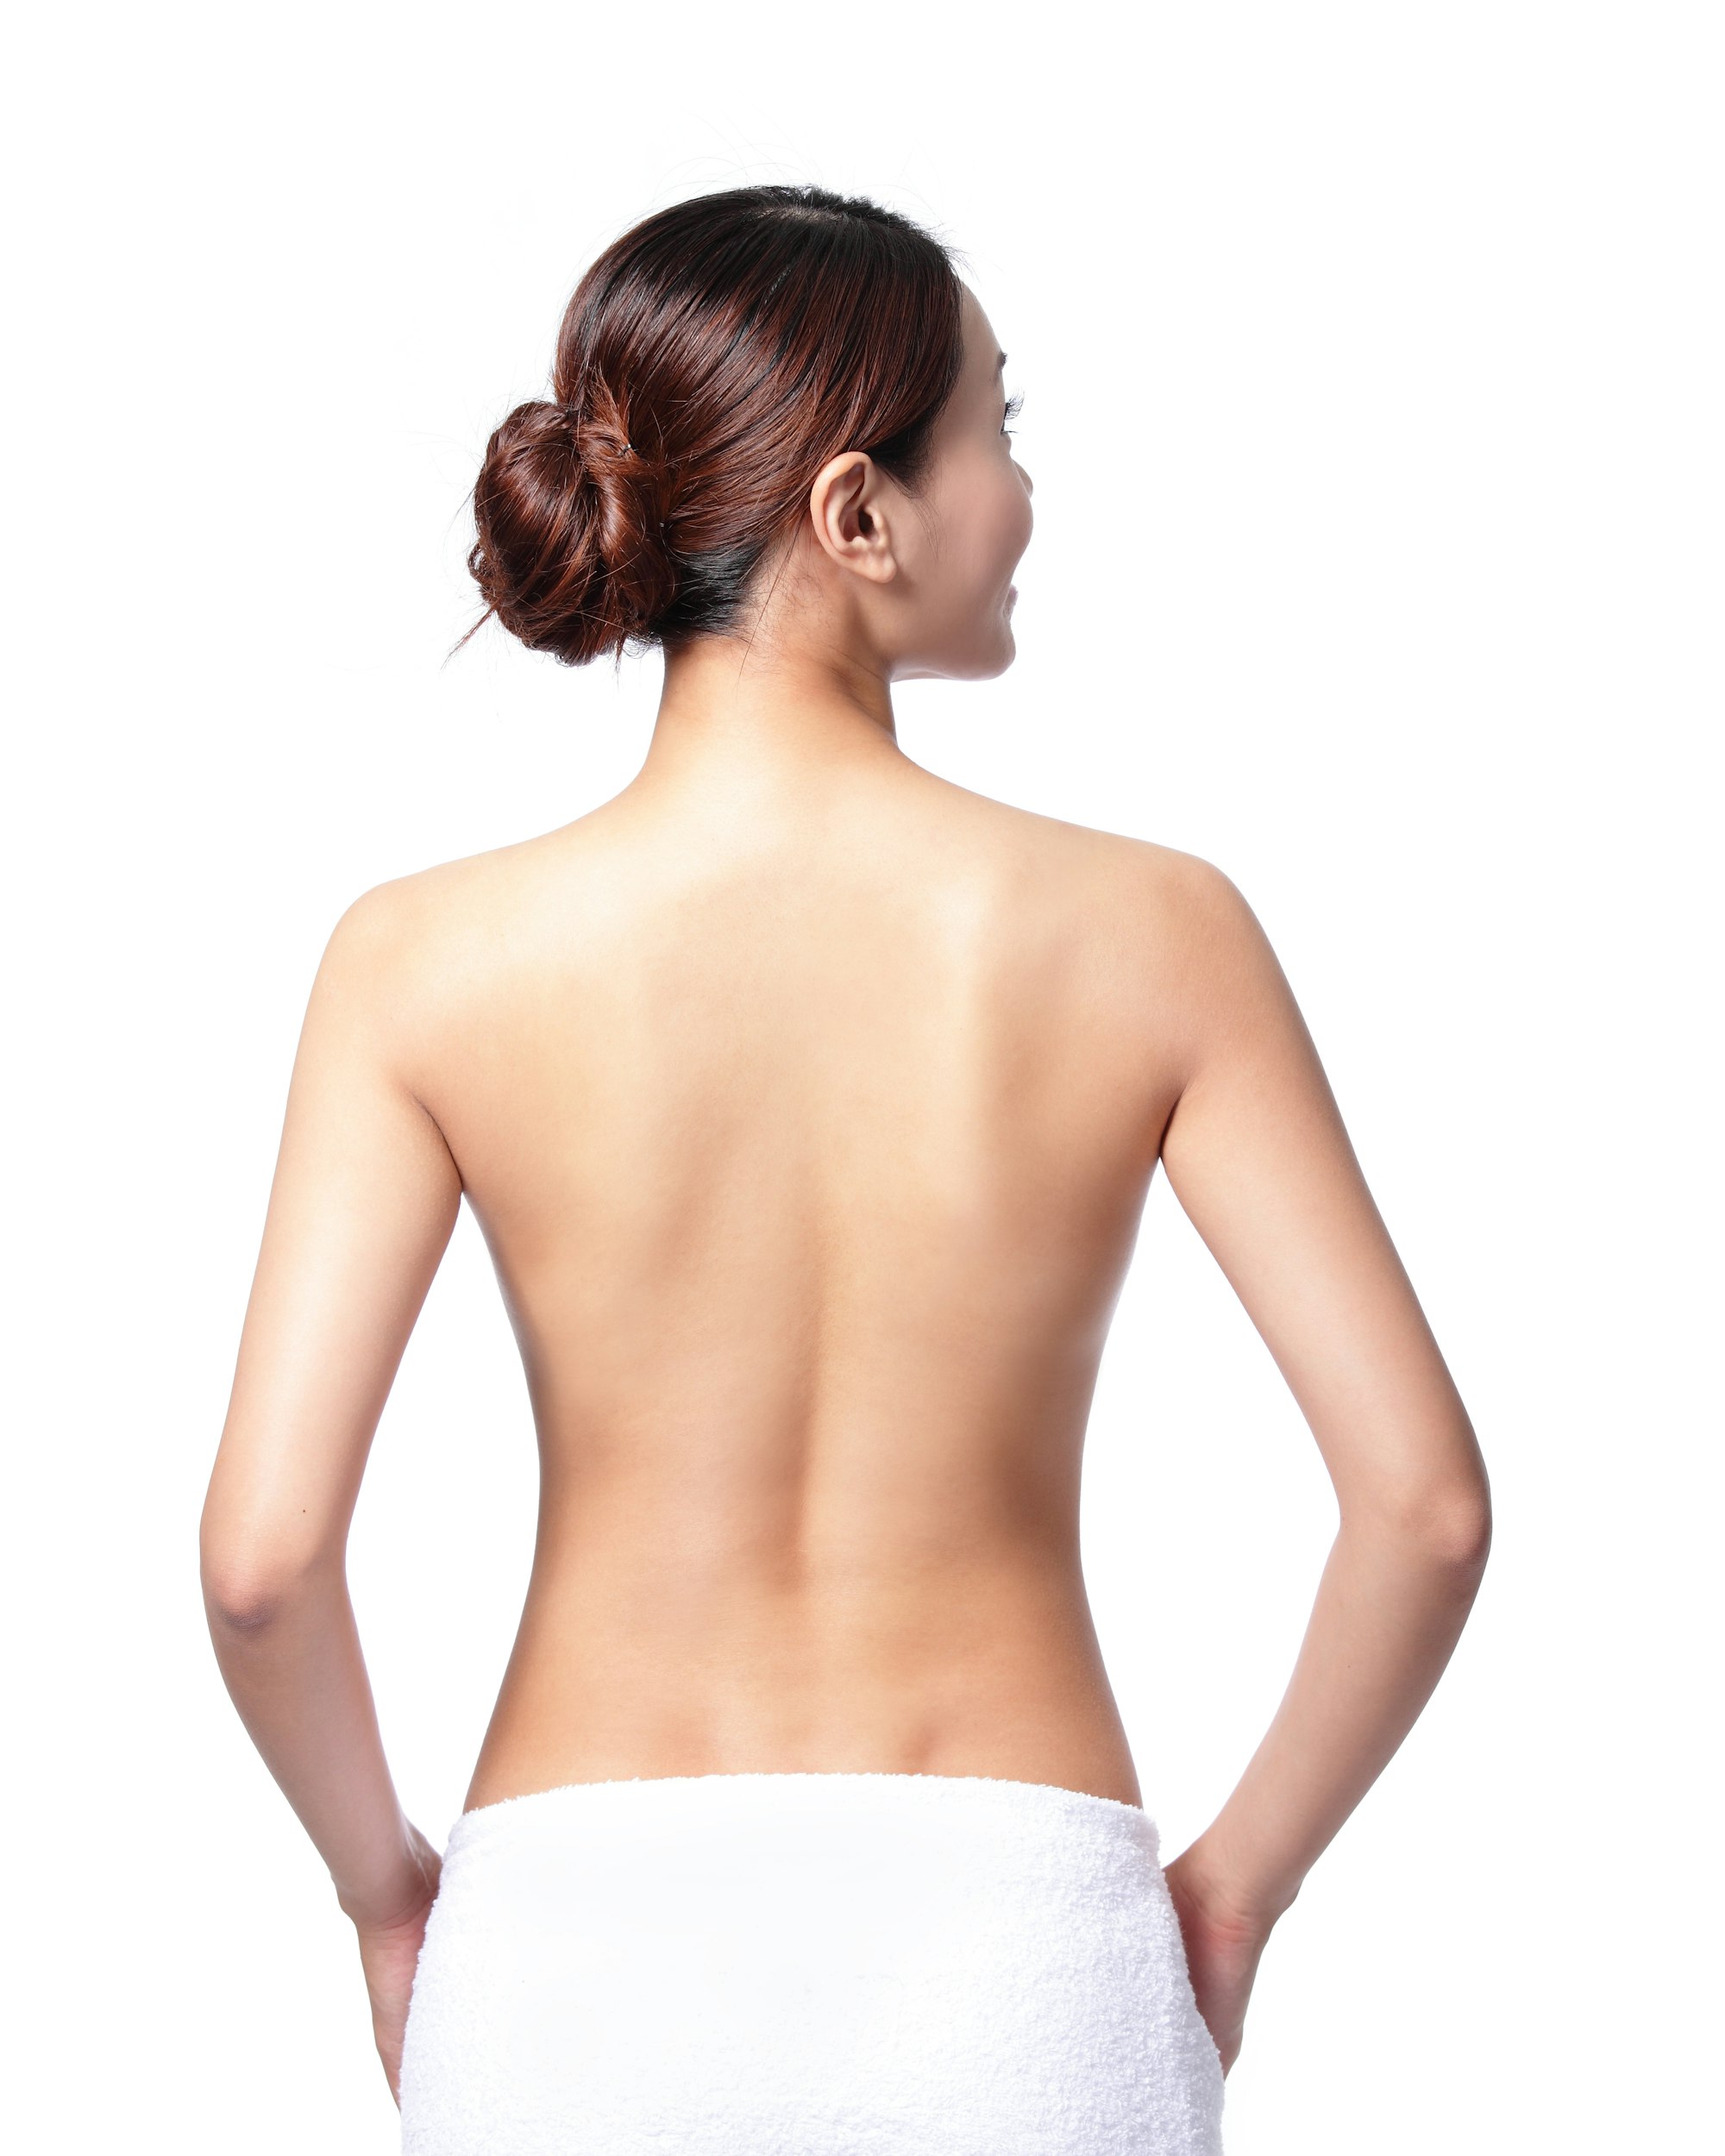 Woman with toned back